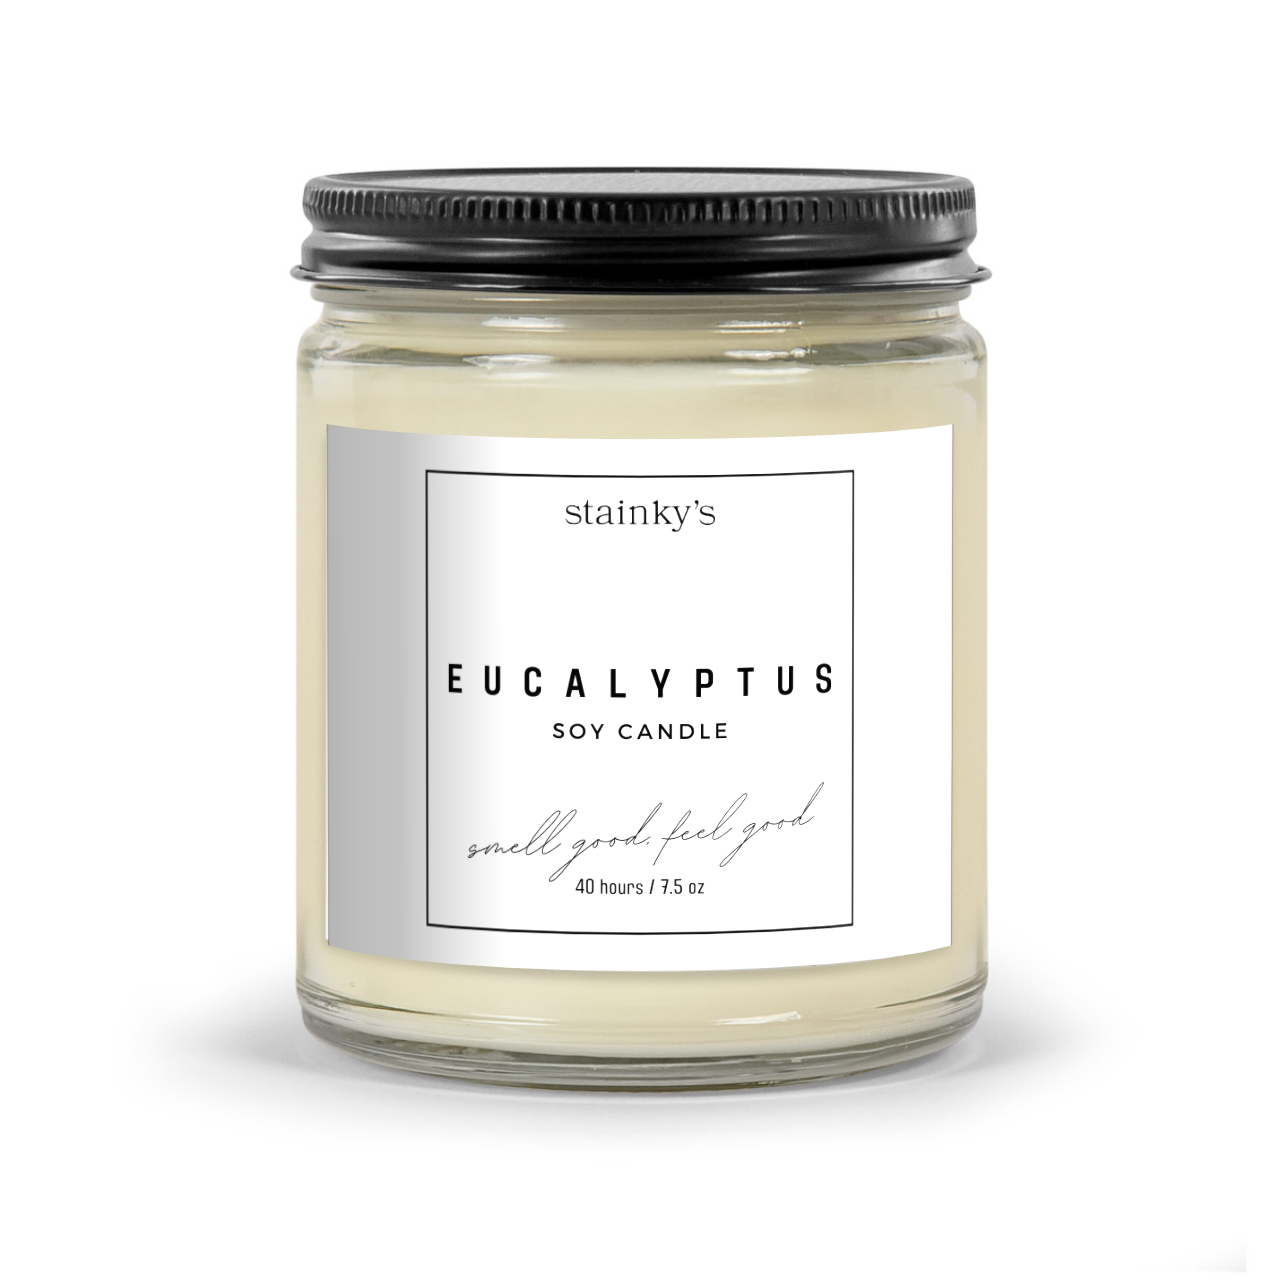 lavender eucalyptus soy candle 	 	 	 eucalyptus mint soy candle 	 	 	 best soy eucalyptus candle 	 	 	 can you use essential oils in soy candles 	 	 	 are soy candles with essential oils safe